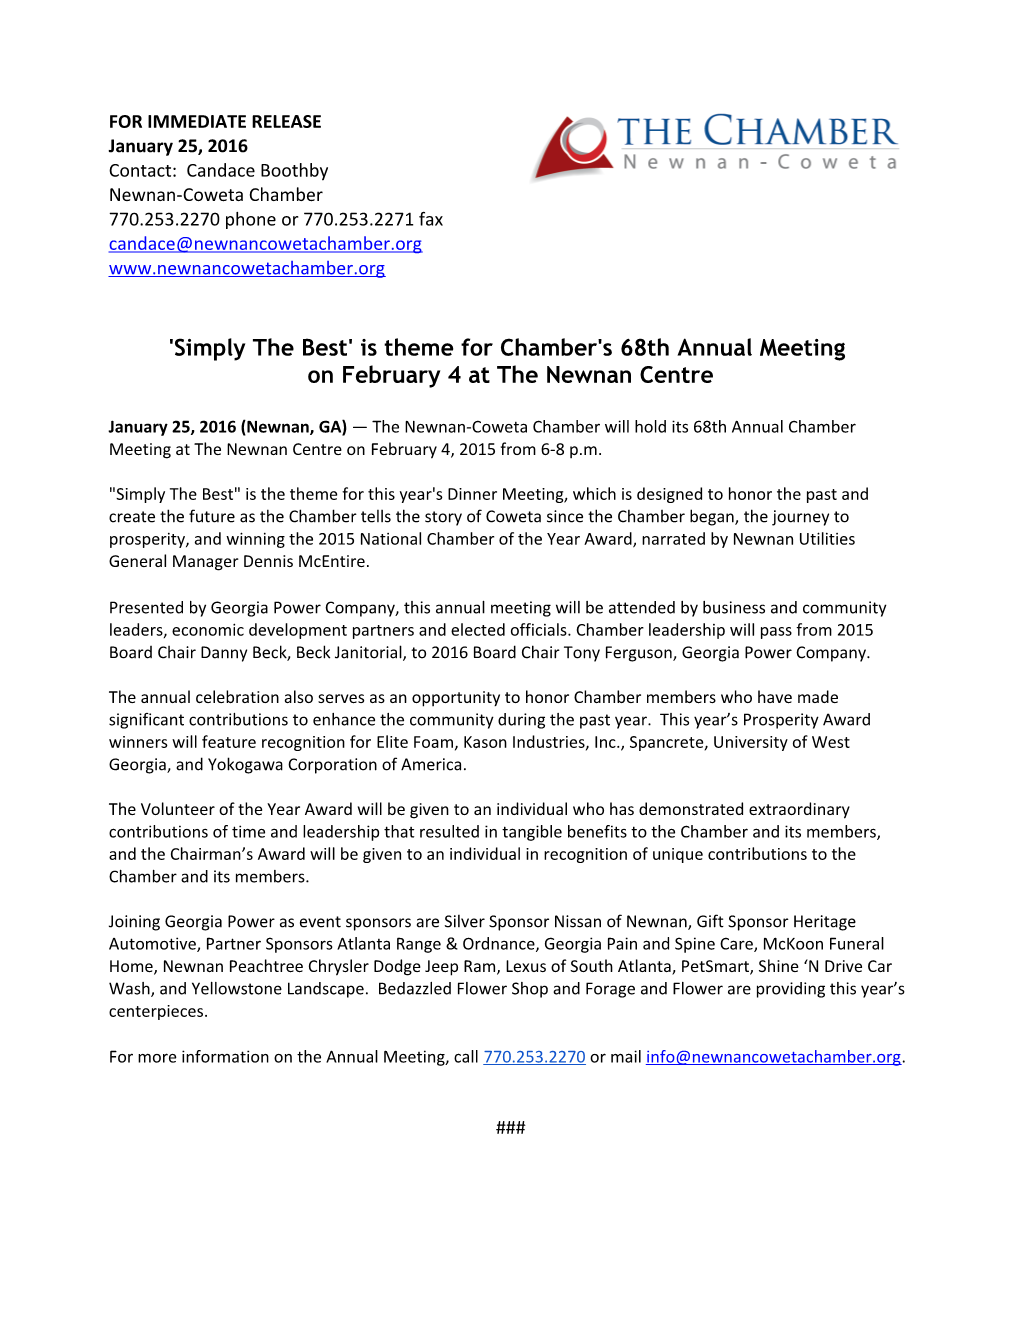 'Simply the Best' Is Theme for Chamber's 68Th Annual Meeting s1